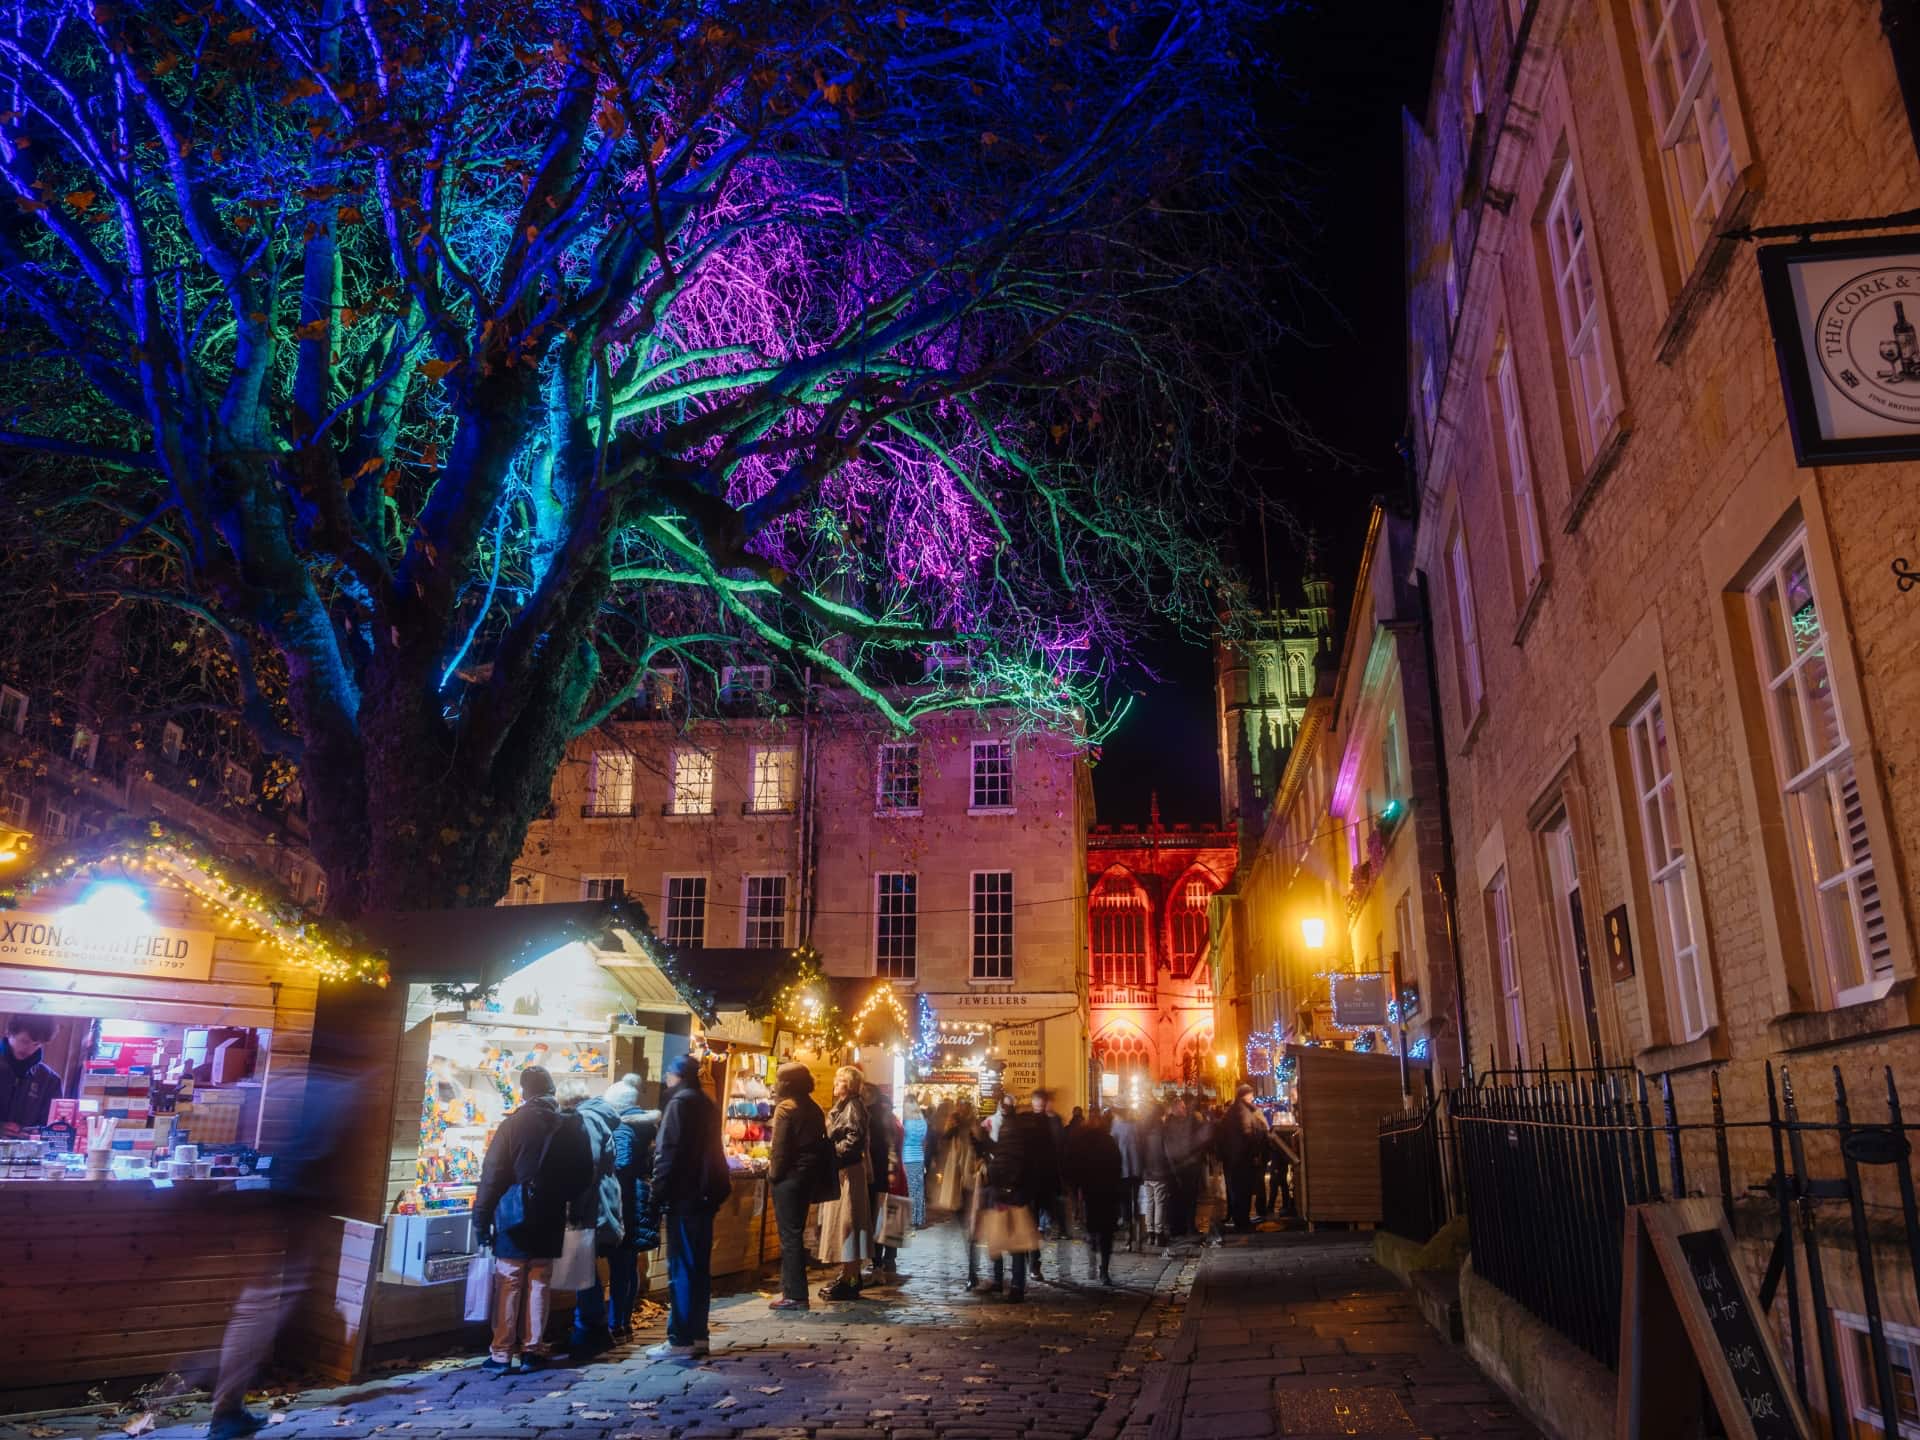 Wooden huts selling Christmas gifts to people on a cobbled street. It is night and a large tree behind the stalls is lit up in multicolour. Classic Bath stone houses line the street as people wiz by.